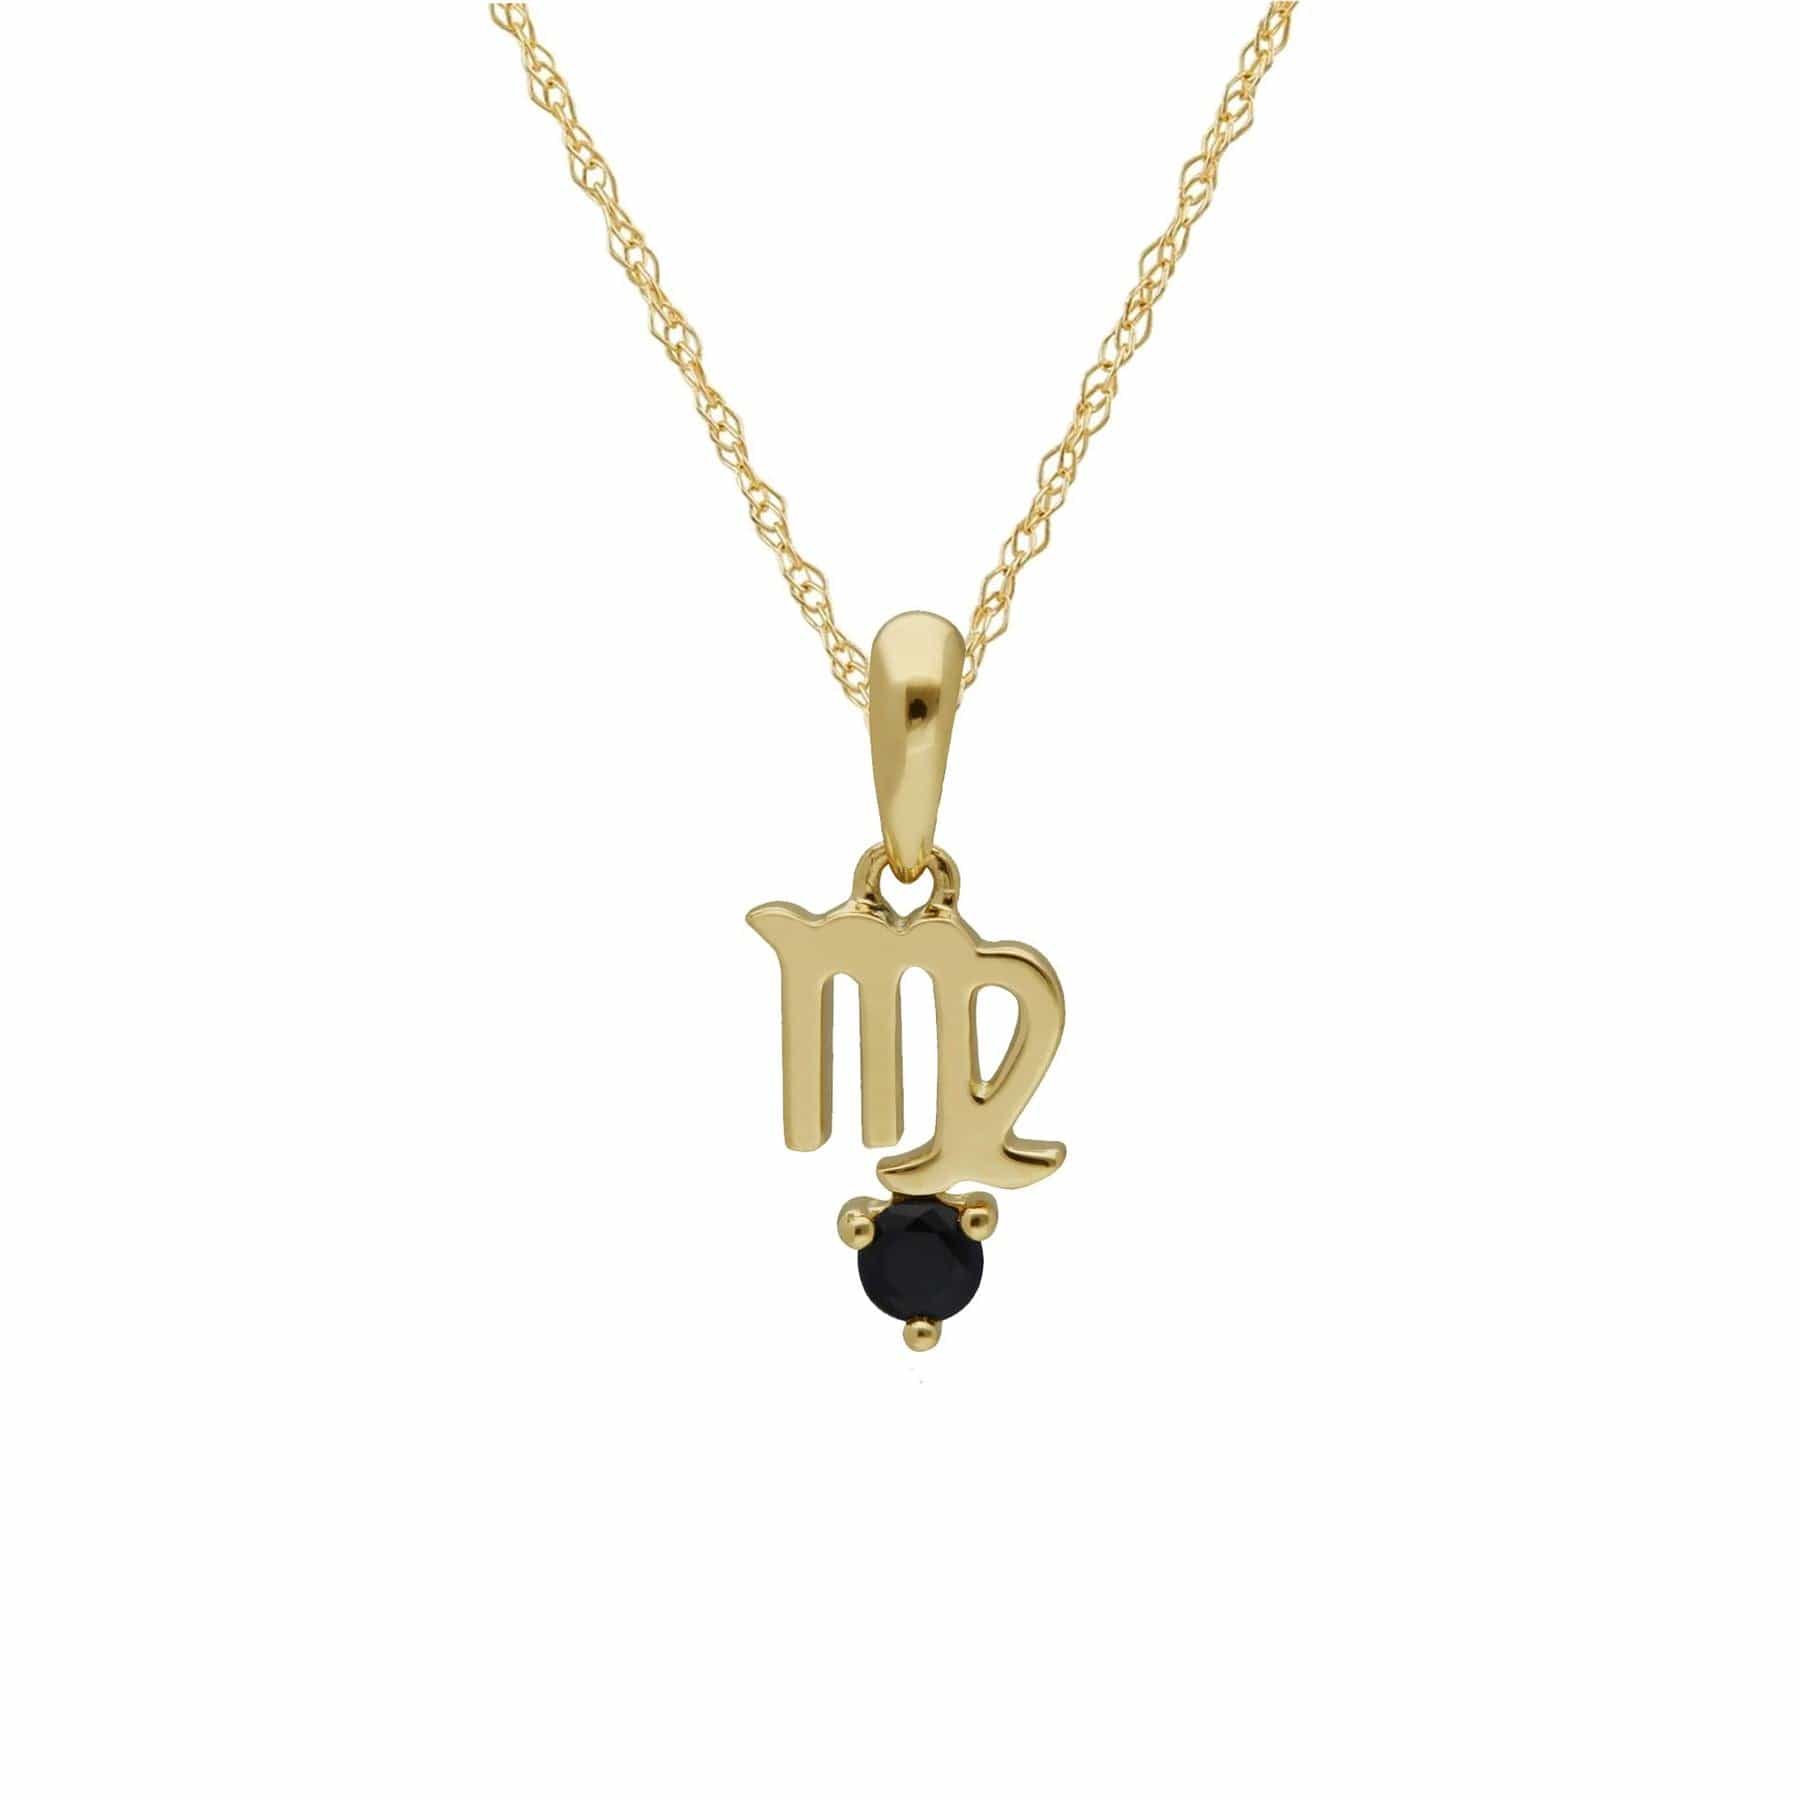 135P2000019 Sapphire Virgo Zodiac Charm Necklace in 9ct Yellow Gold 1